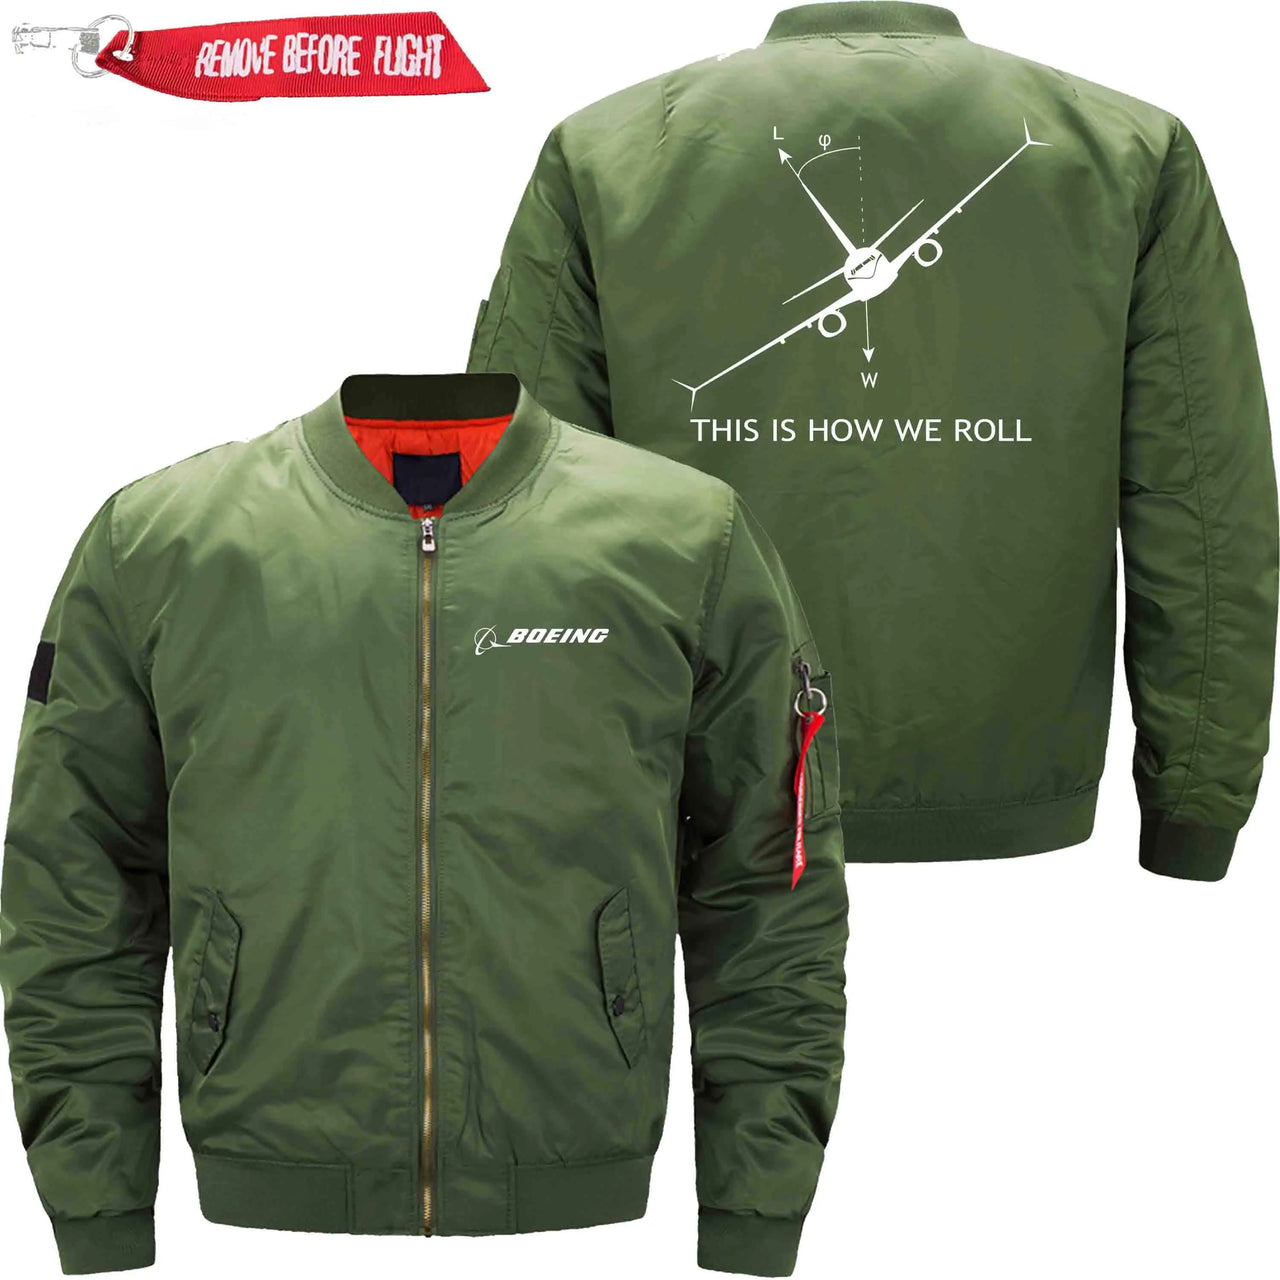 THIS IS HOW WE ROLL B737 - JACKET THE AV8R